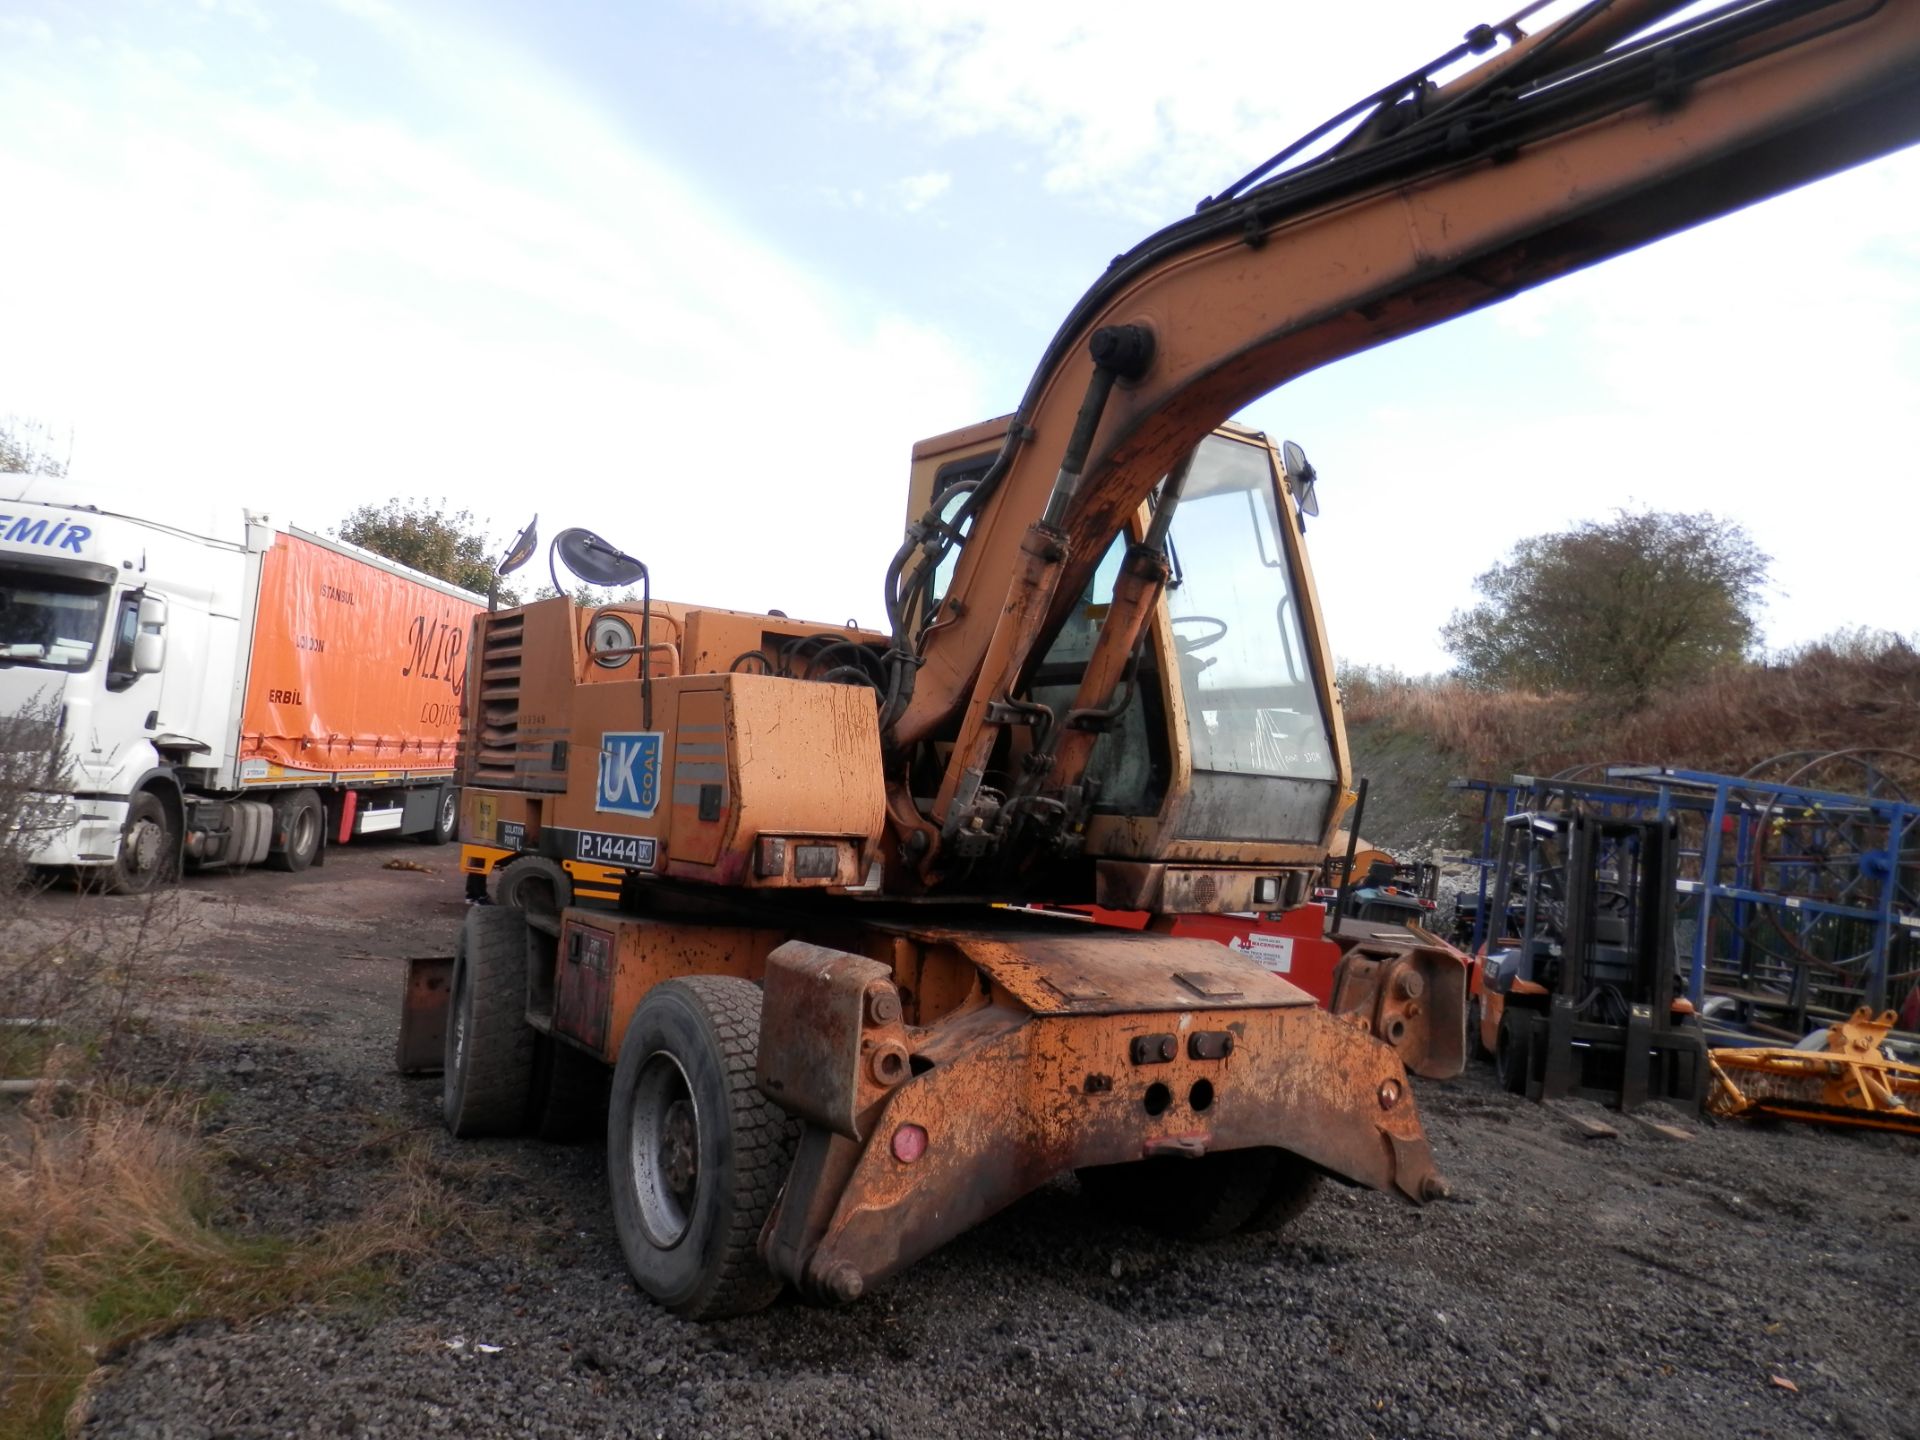 ALL WORKING CASE 688BP 17.2 TONNE DIGGER, 65KW DIESEL ENGINE & MAGNETIC LIFT ATTACHMENT INCLUDED. - Bild 5 aus 17